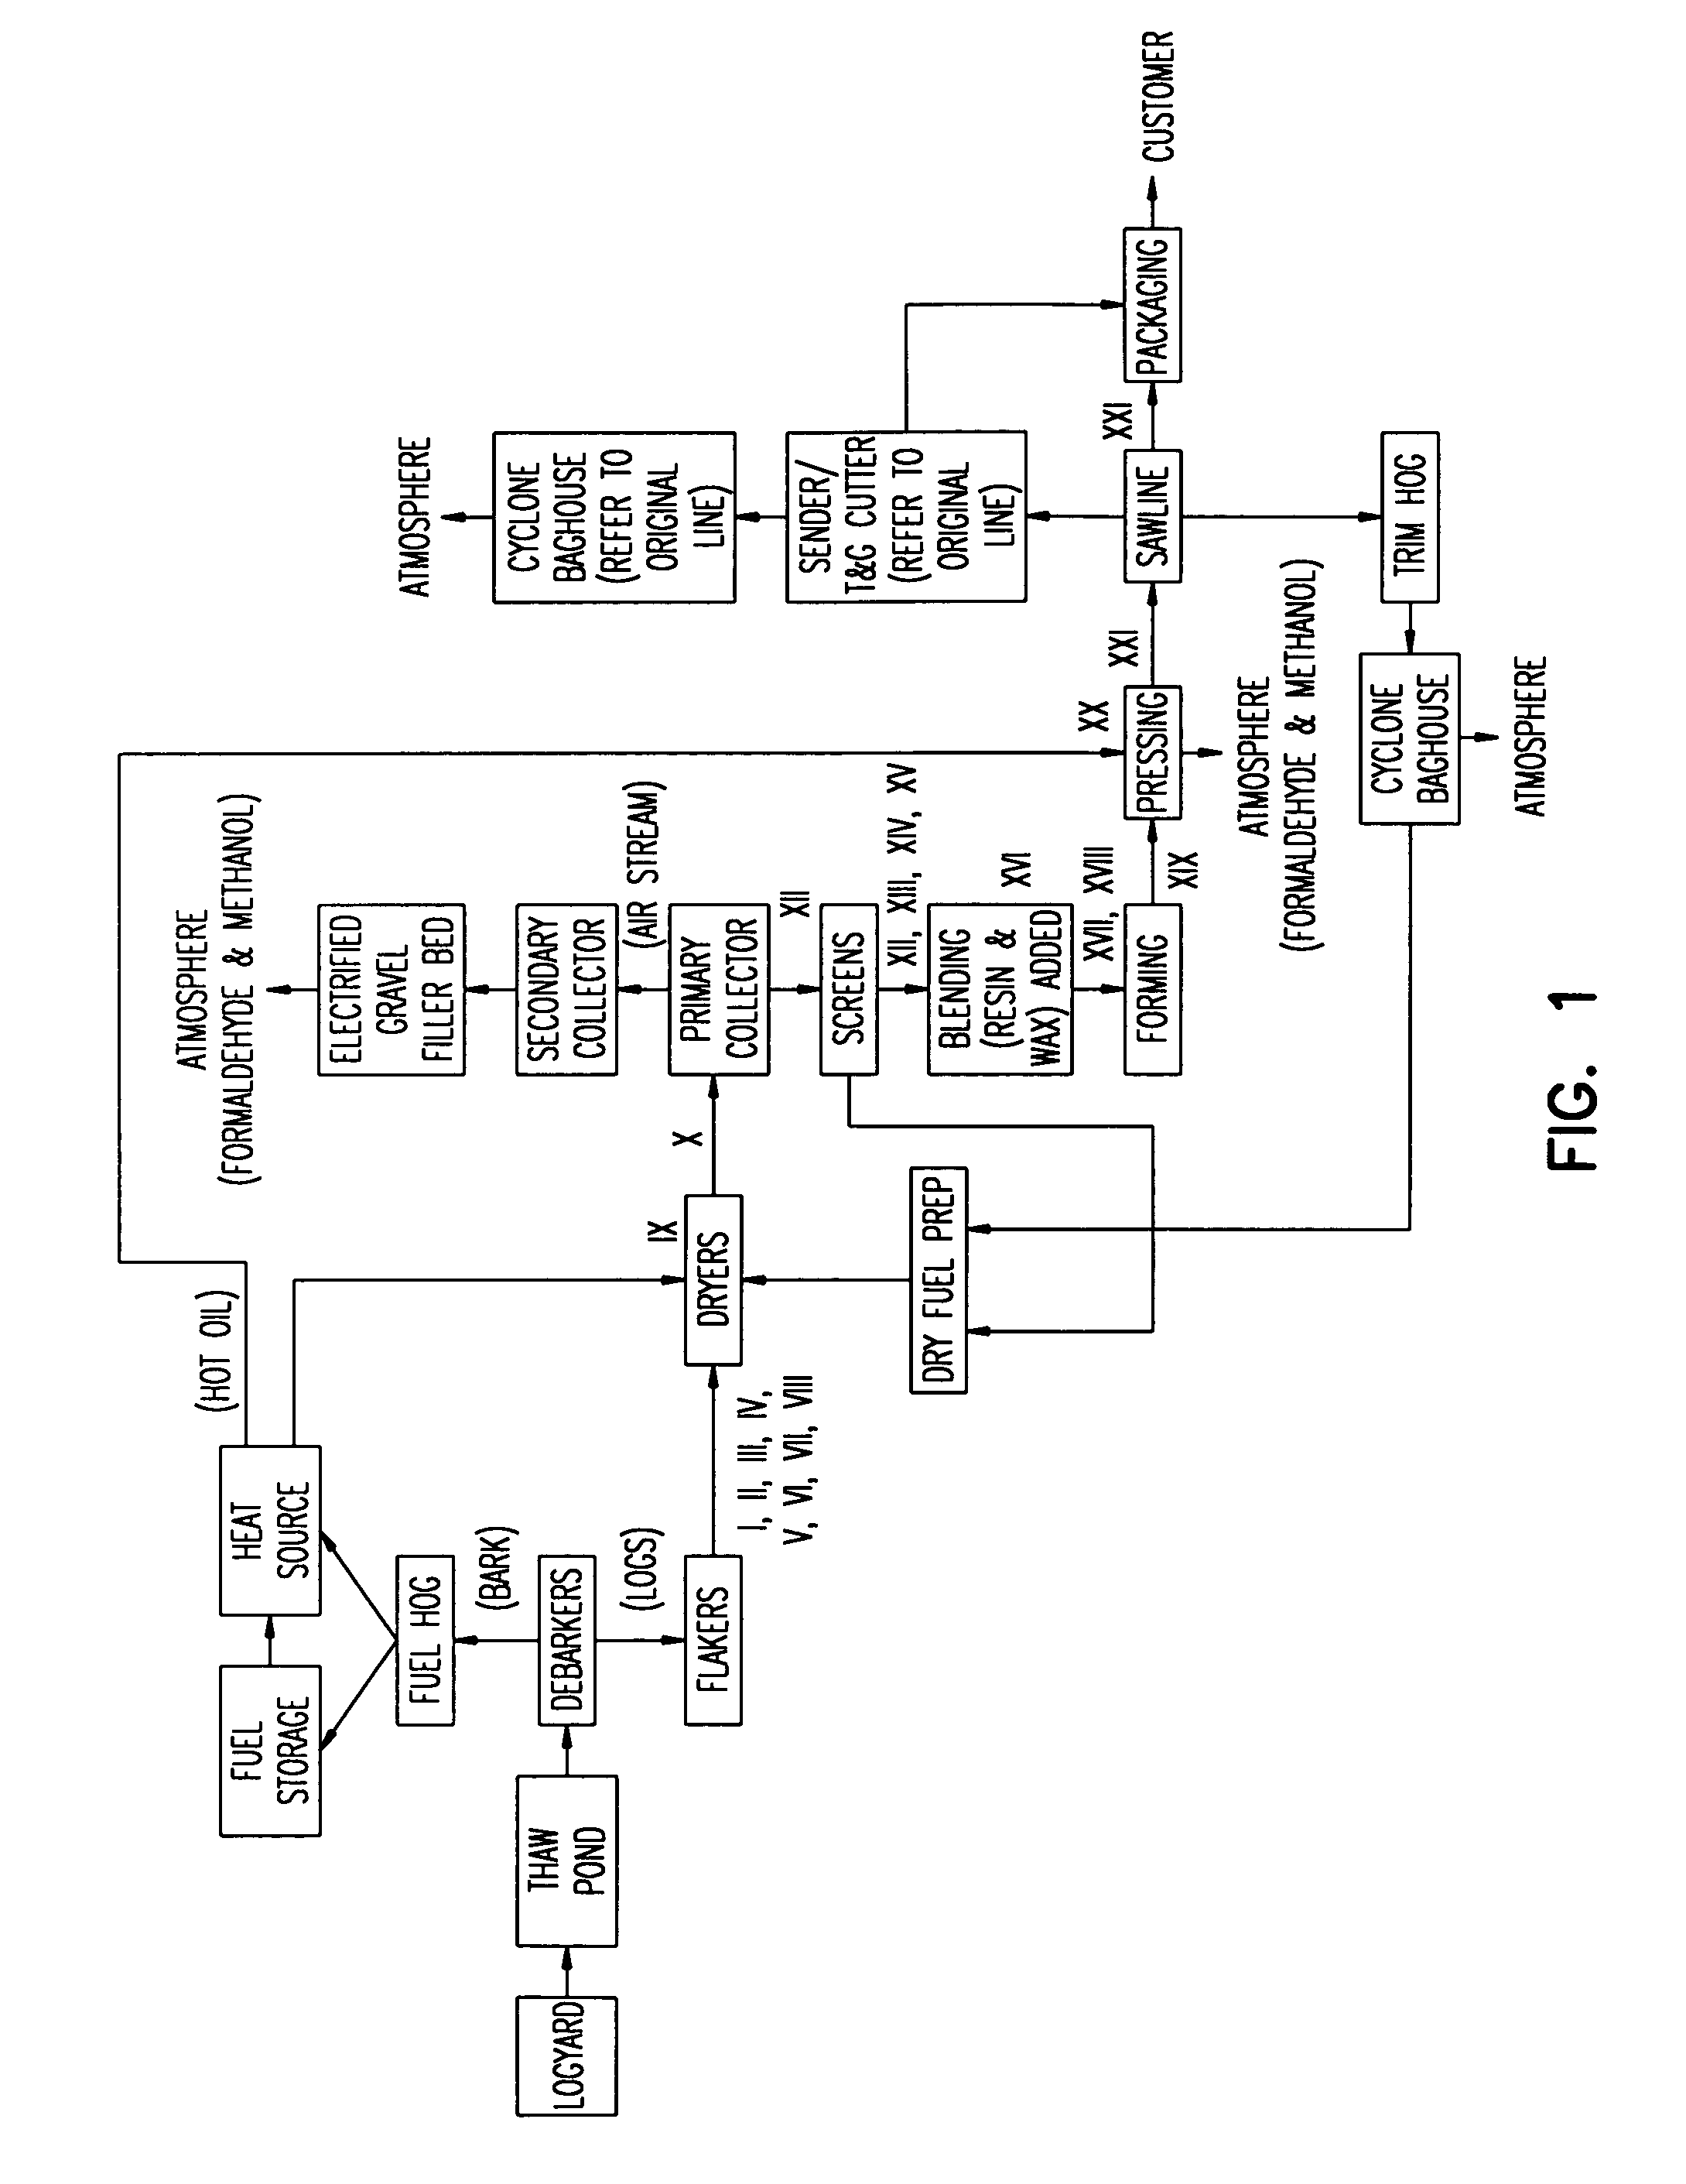 Wood-based product treated with silicone-containing material and dianion, and methods of making the same